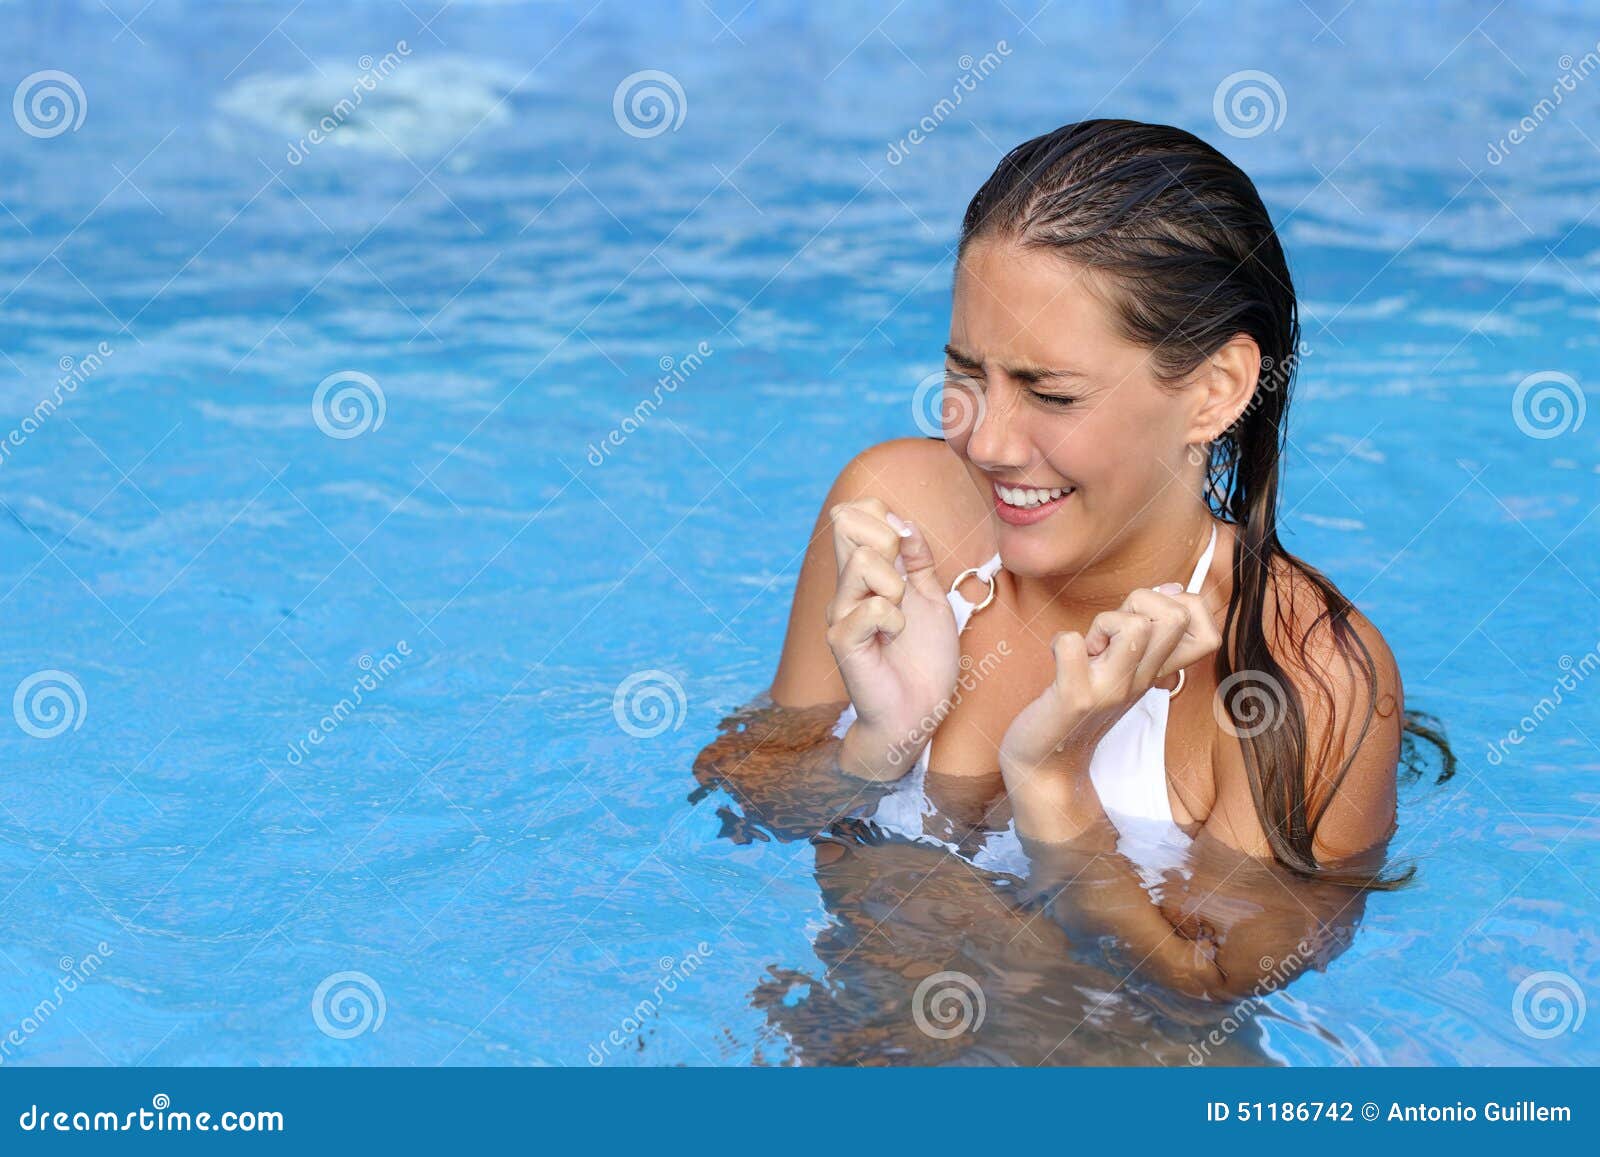 woman complaints in a cold water of a swimming pool